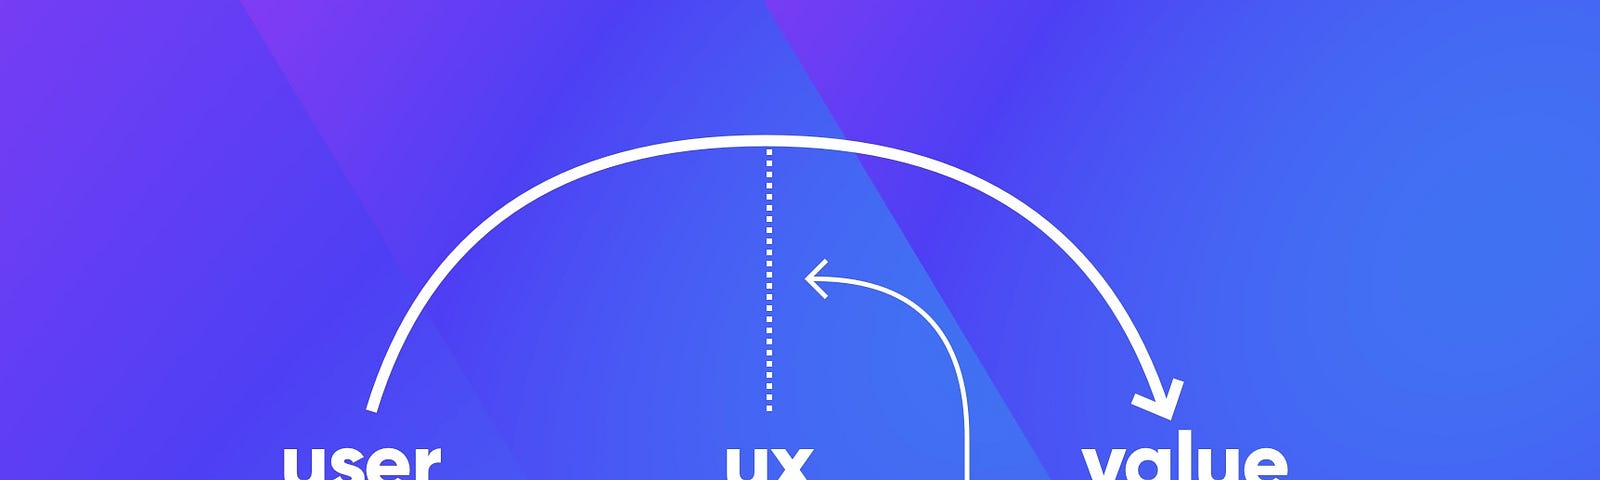 UX is overrated